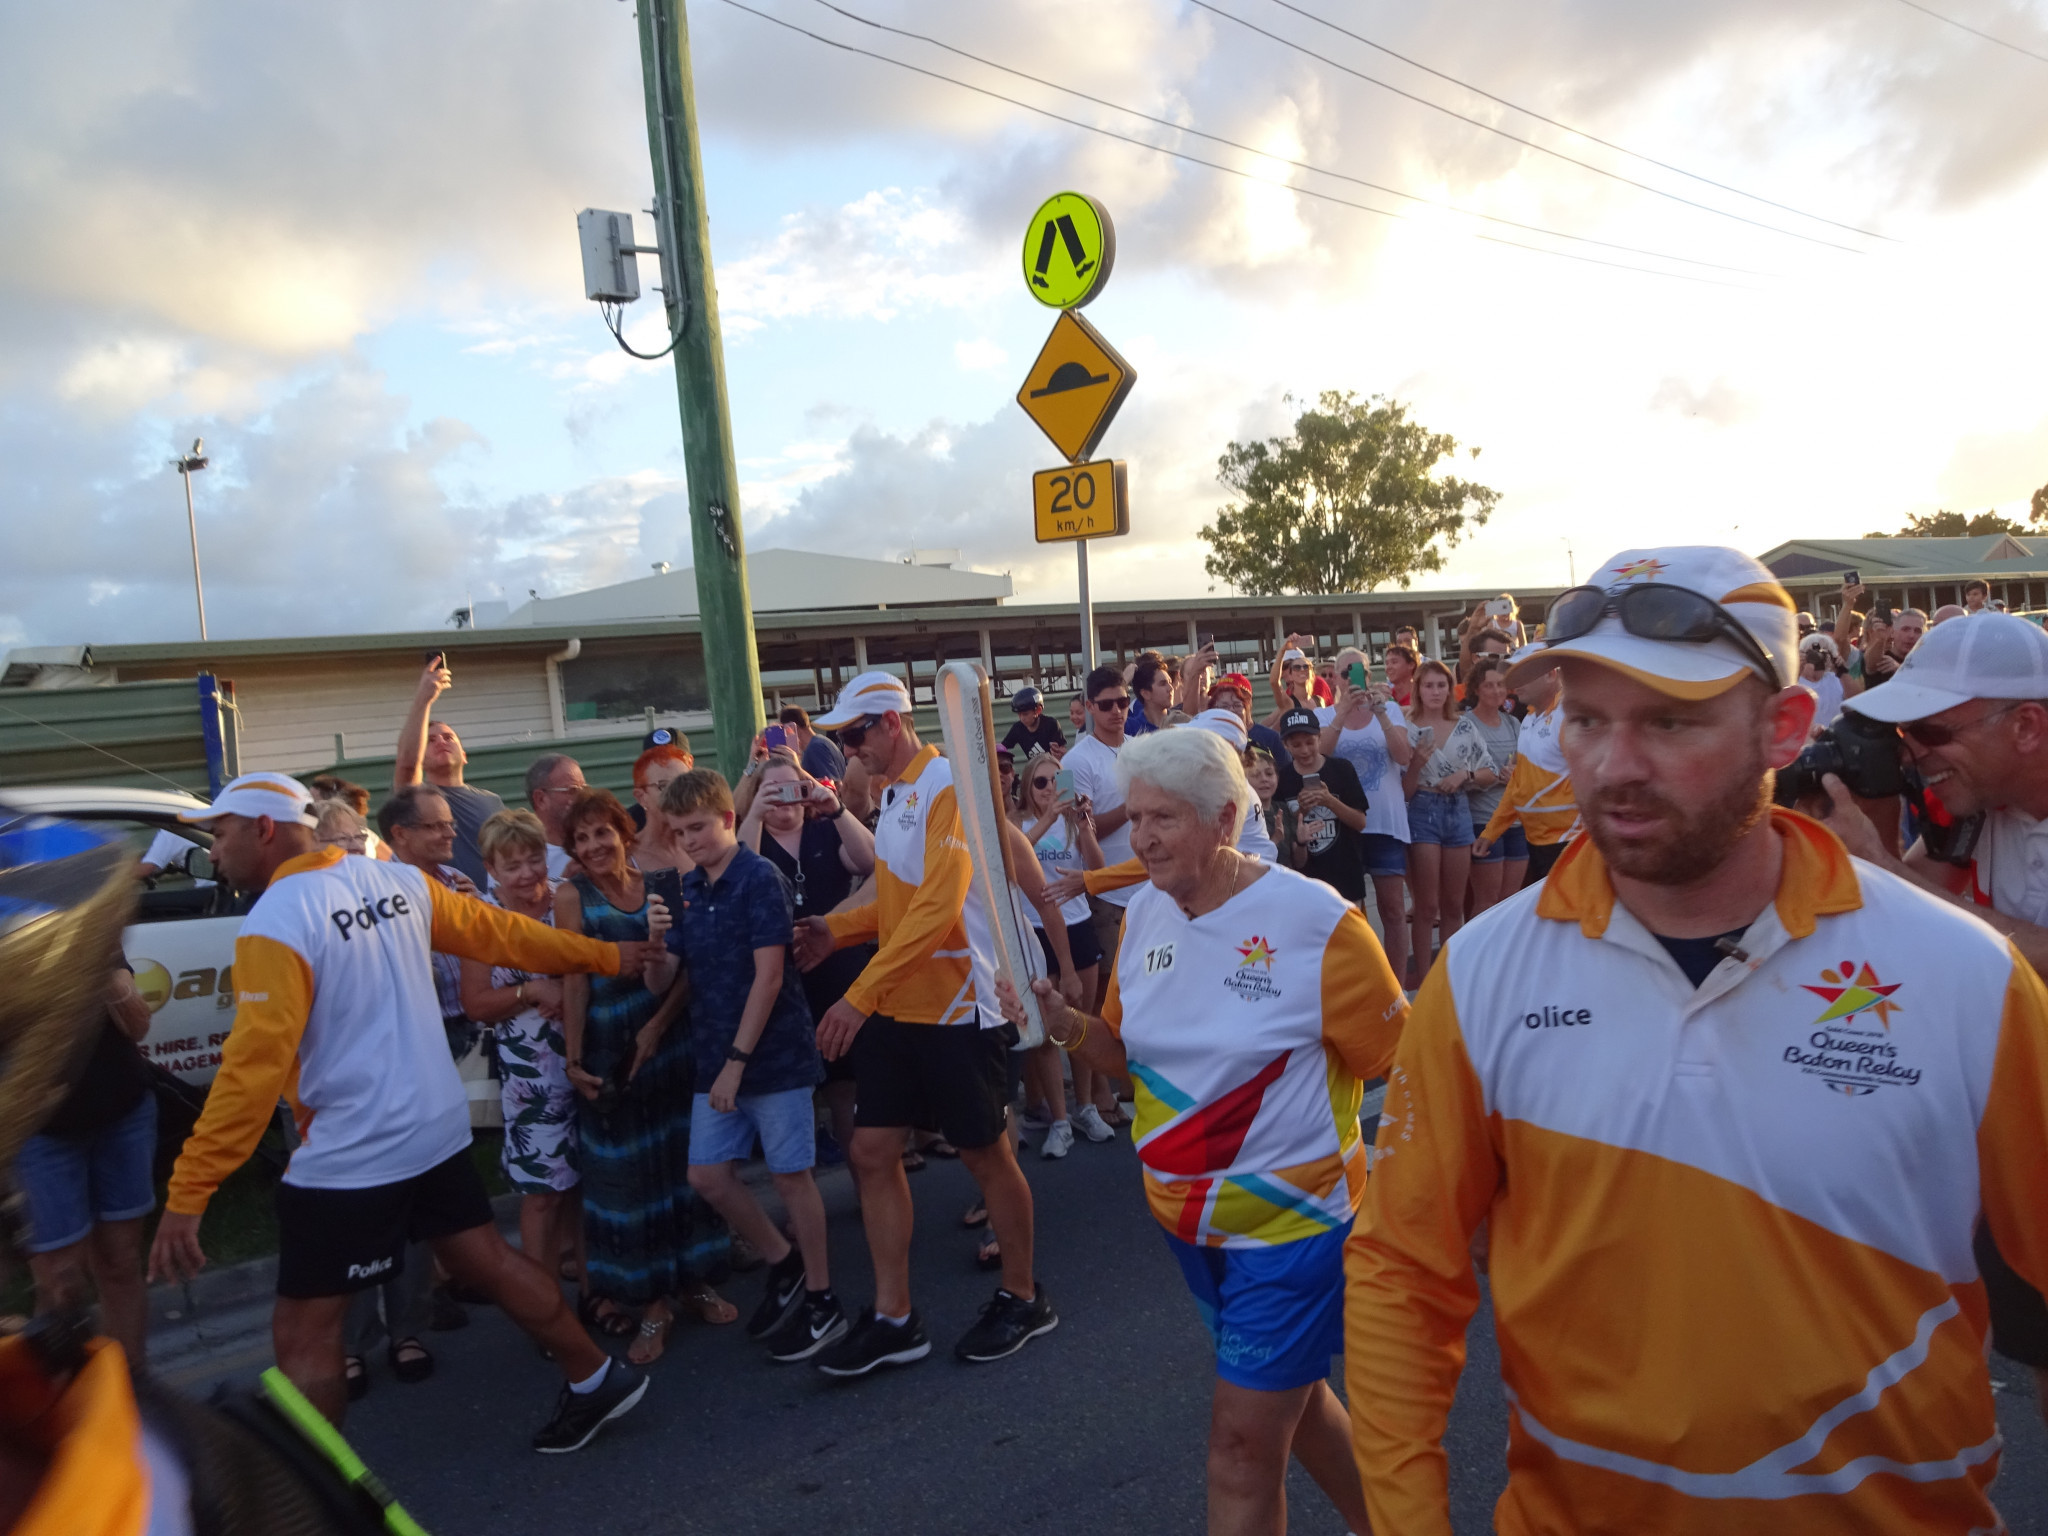 Swimming legend Fraser among stars involved as Gold Coast 2018 Queen's Baton Relay nears conclusion